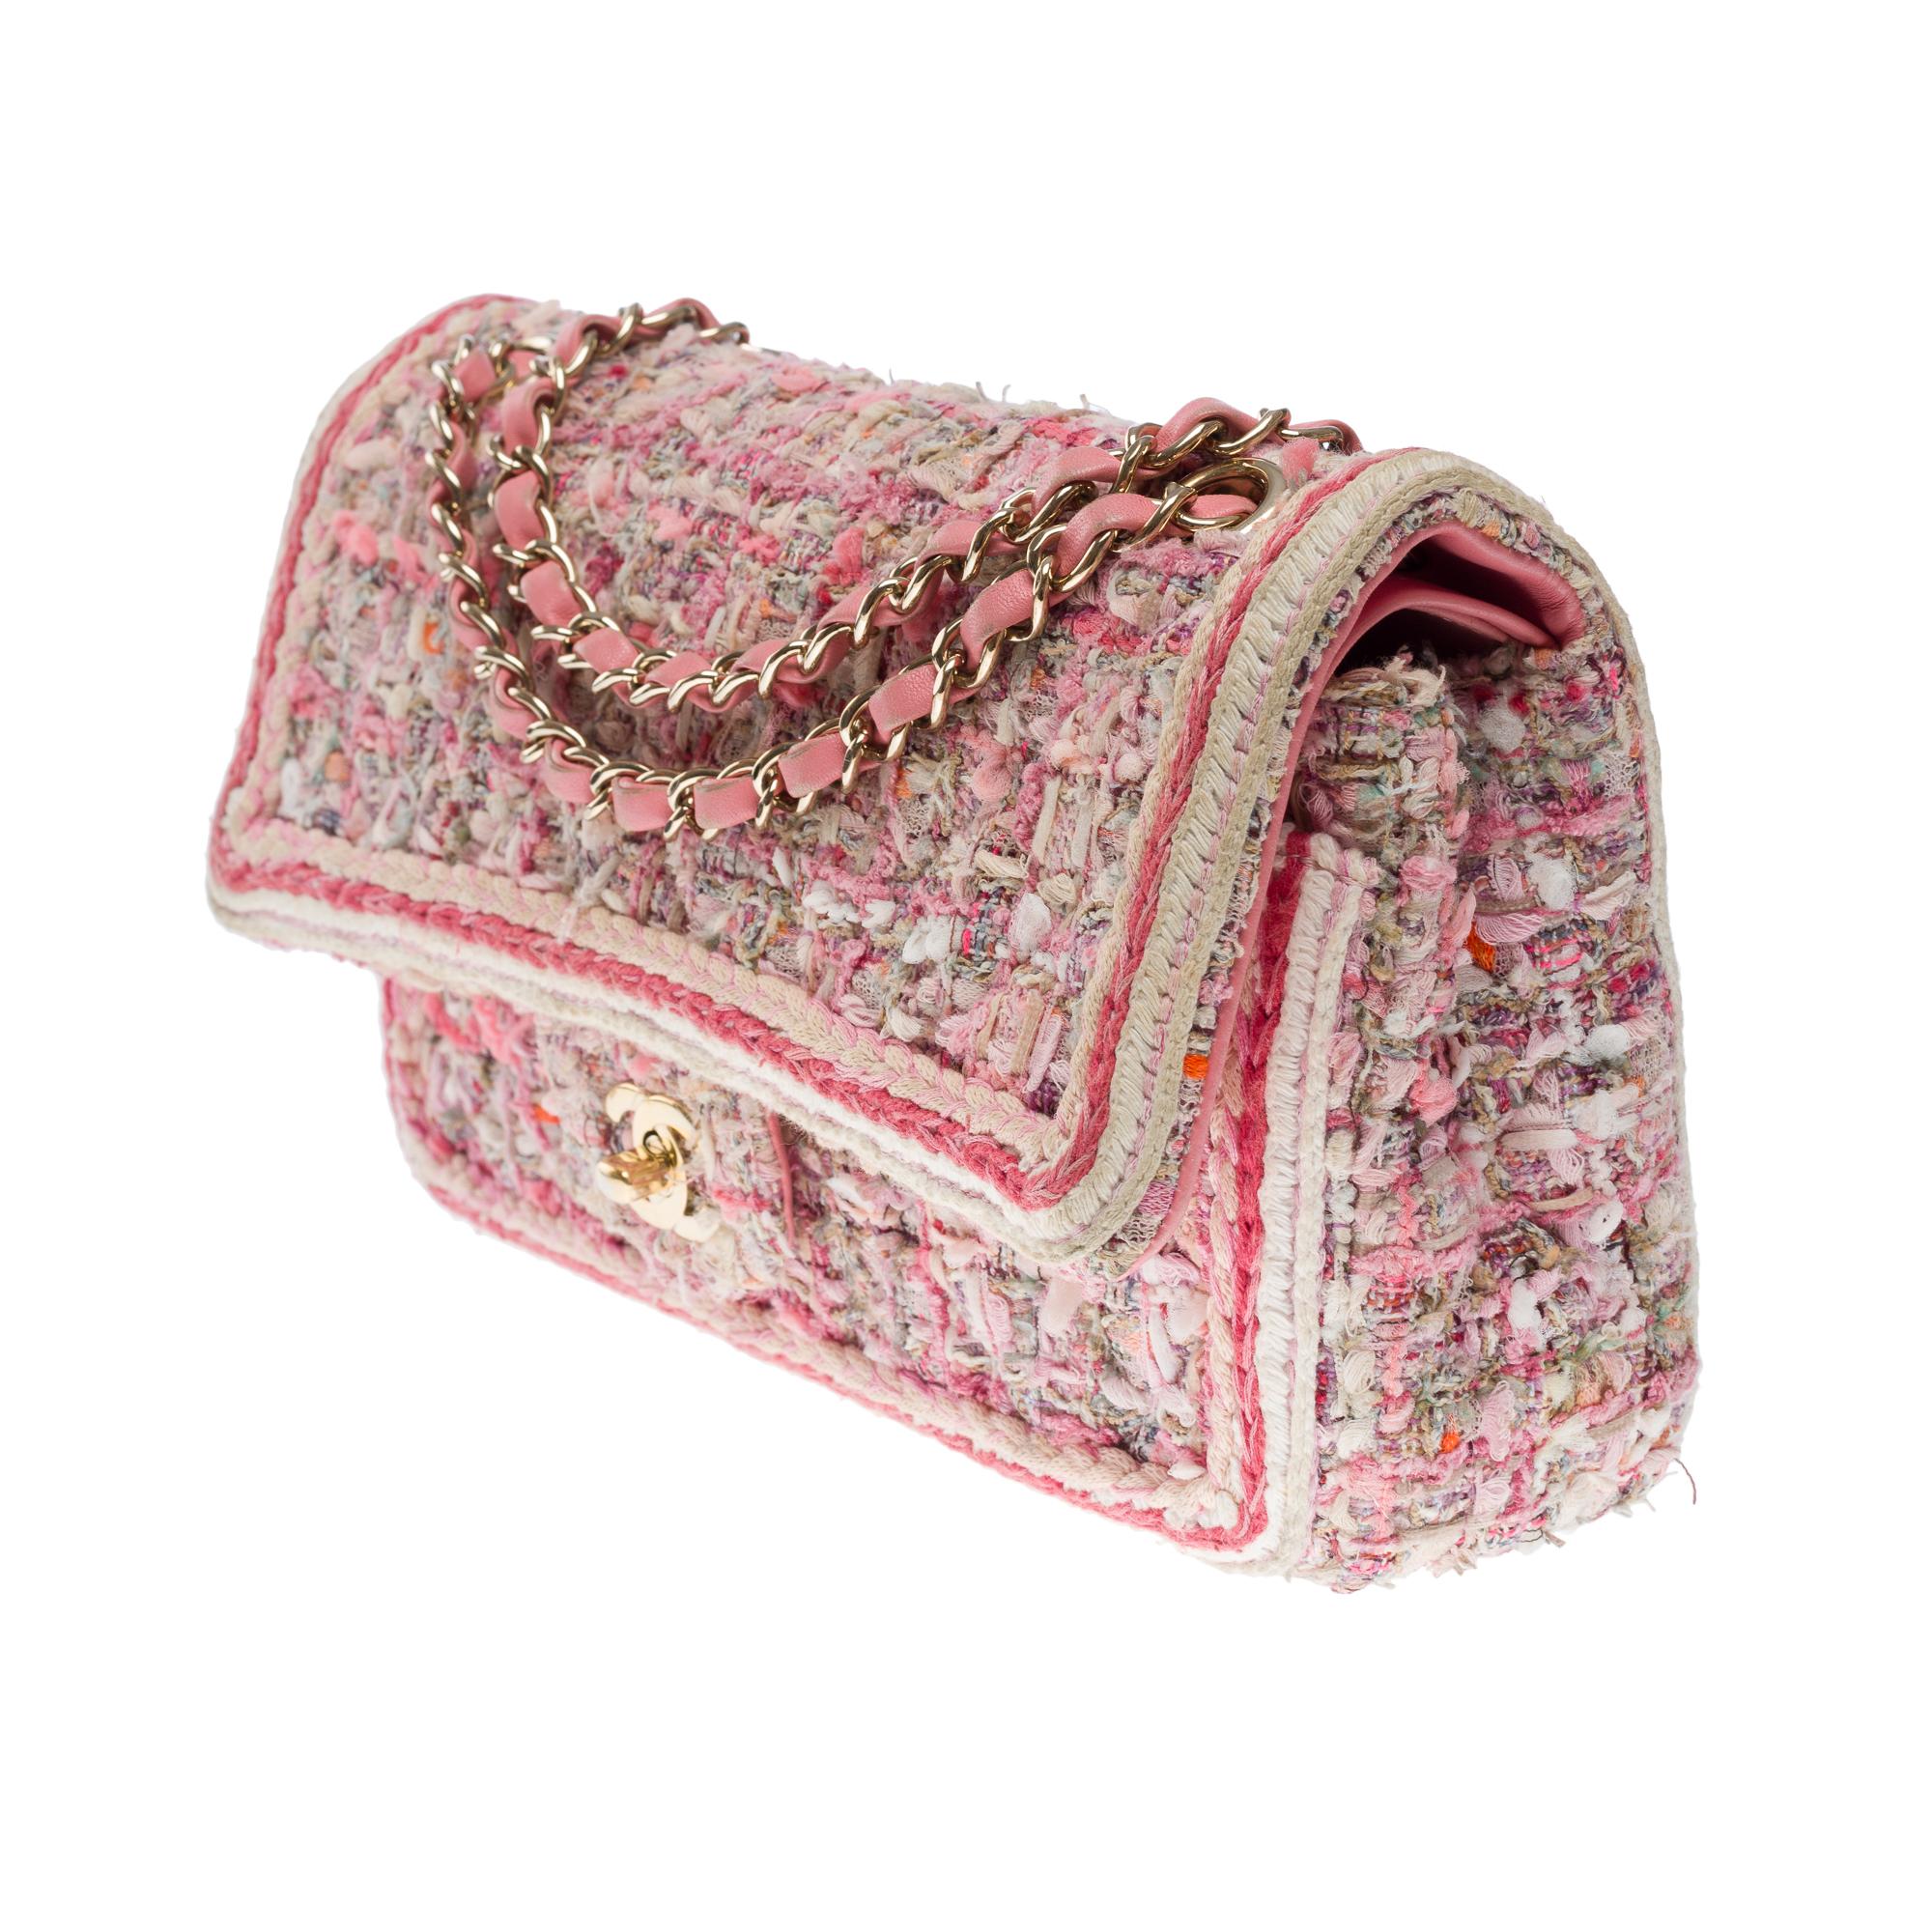 Women's Amazing Chanel Timeless double flap shoulder bag in Pink Quilted Tweed, CHW